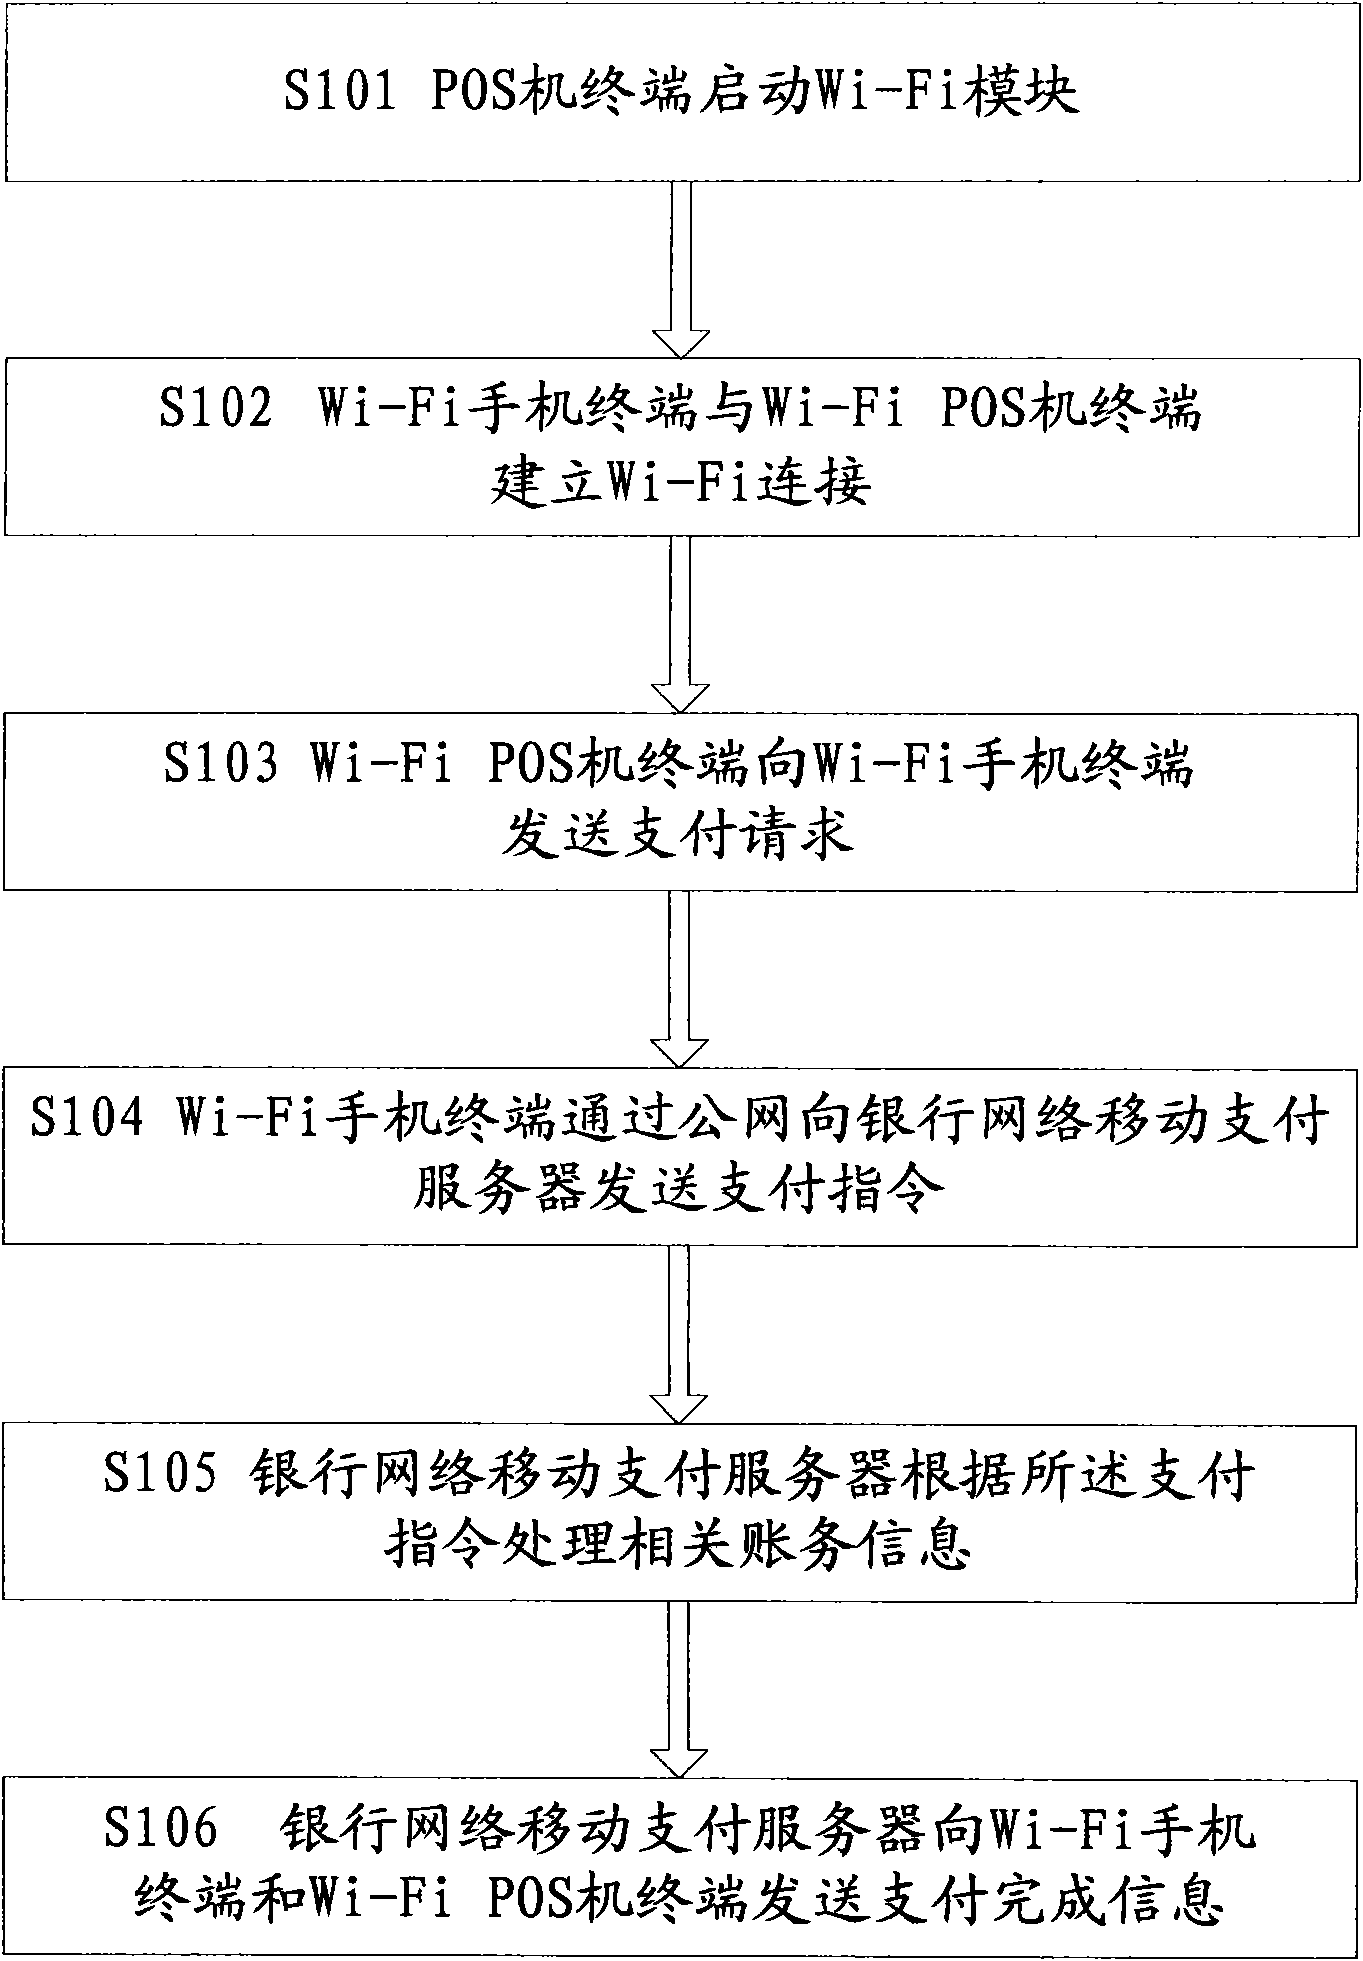 Method and system for payment of Wi-Fi mobile phone-POS machine